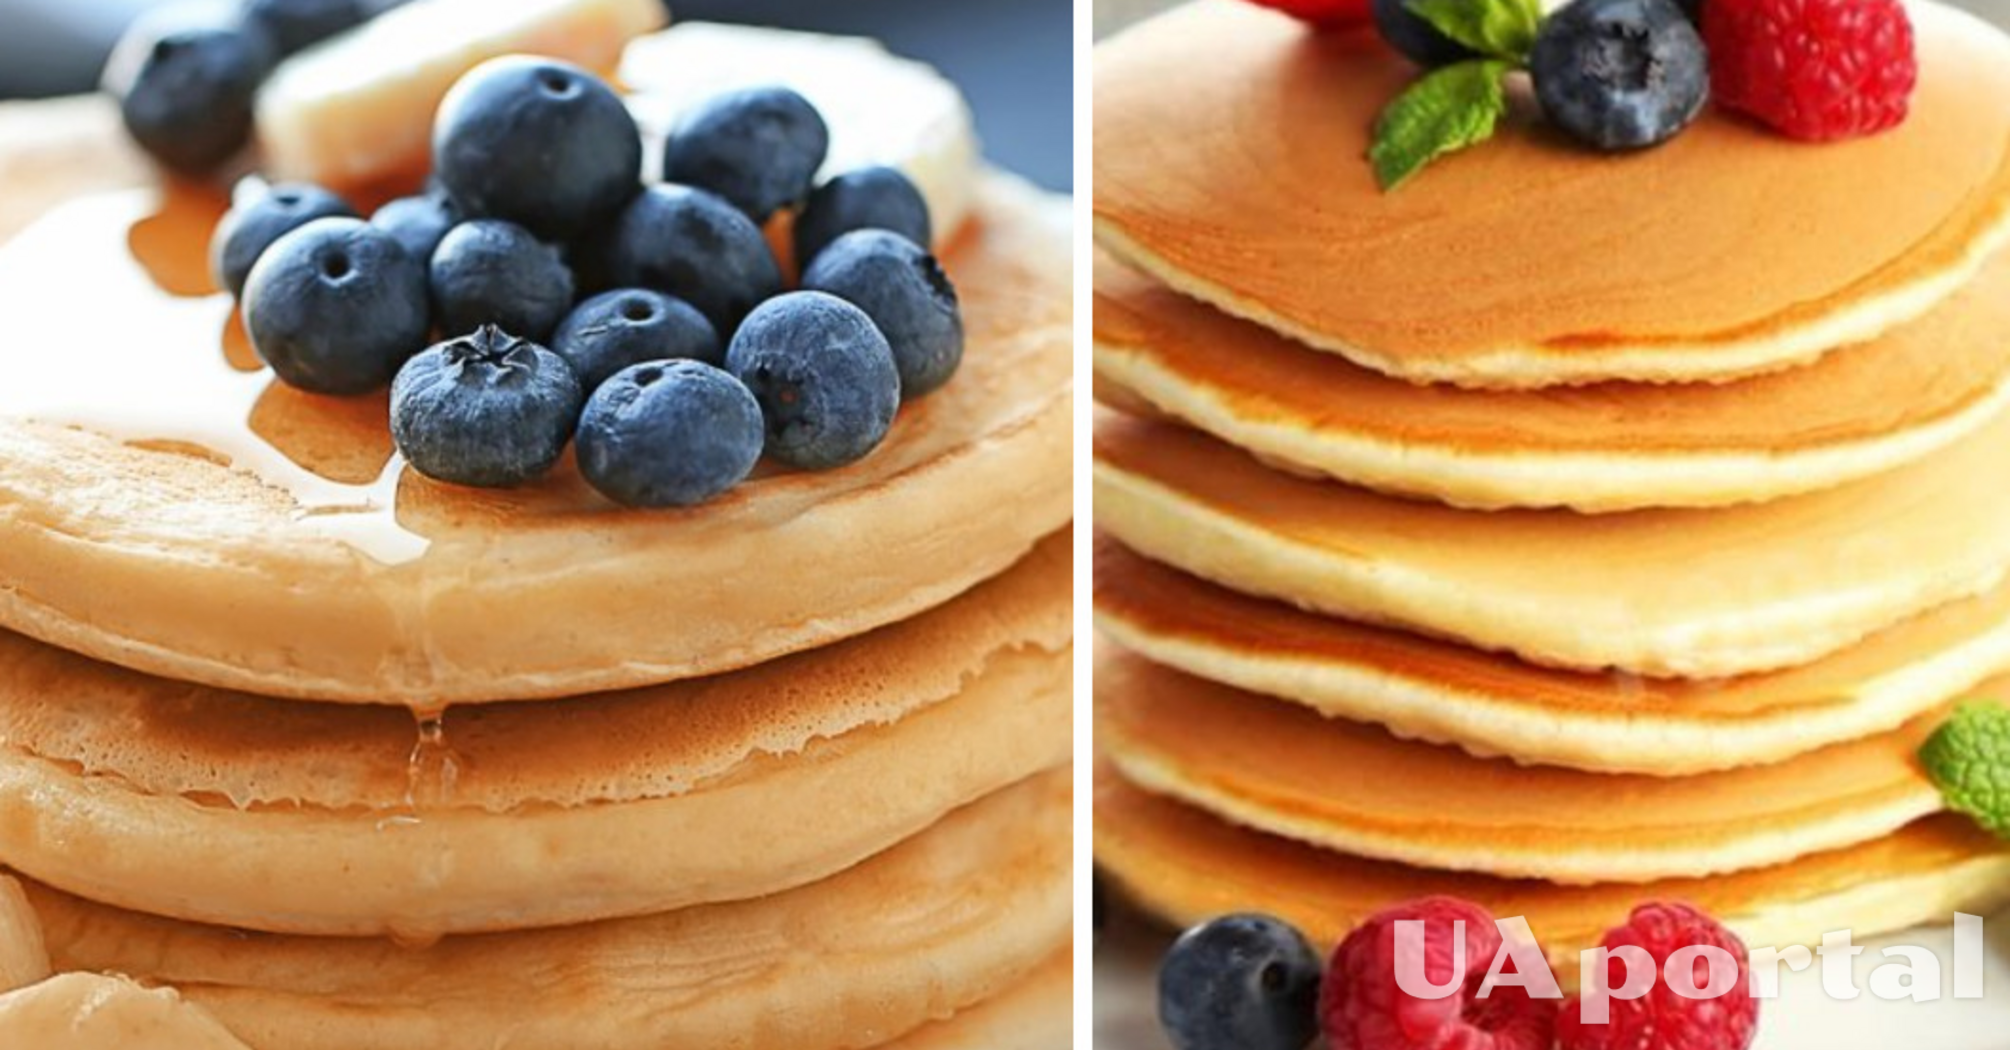 Perfect for breakfast: a quick recipe for American pancakes